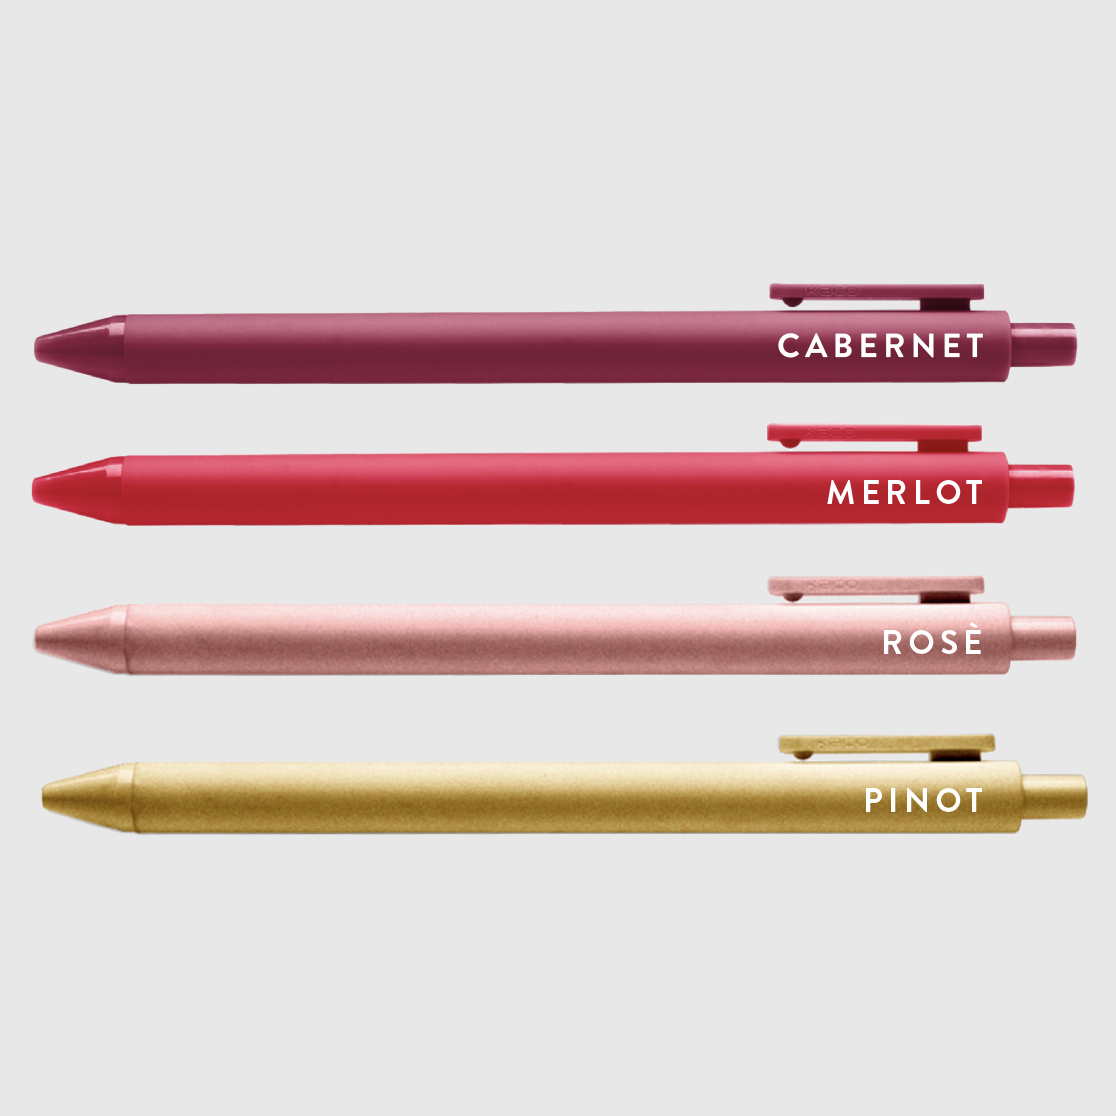 Set of 4 pens -- each pen with matching color and text of different wines (cabernet, merlot, rose, pinot)